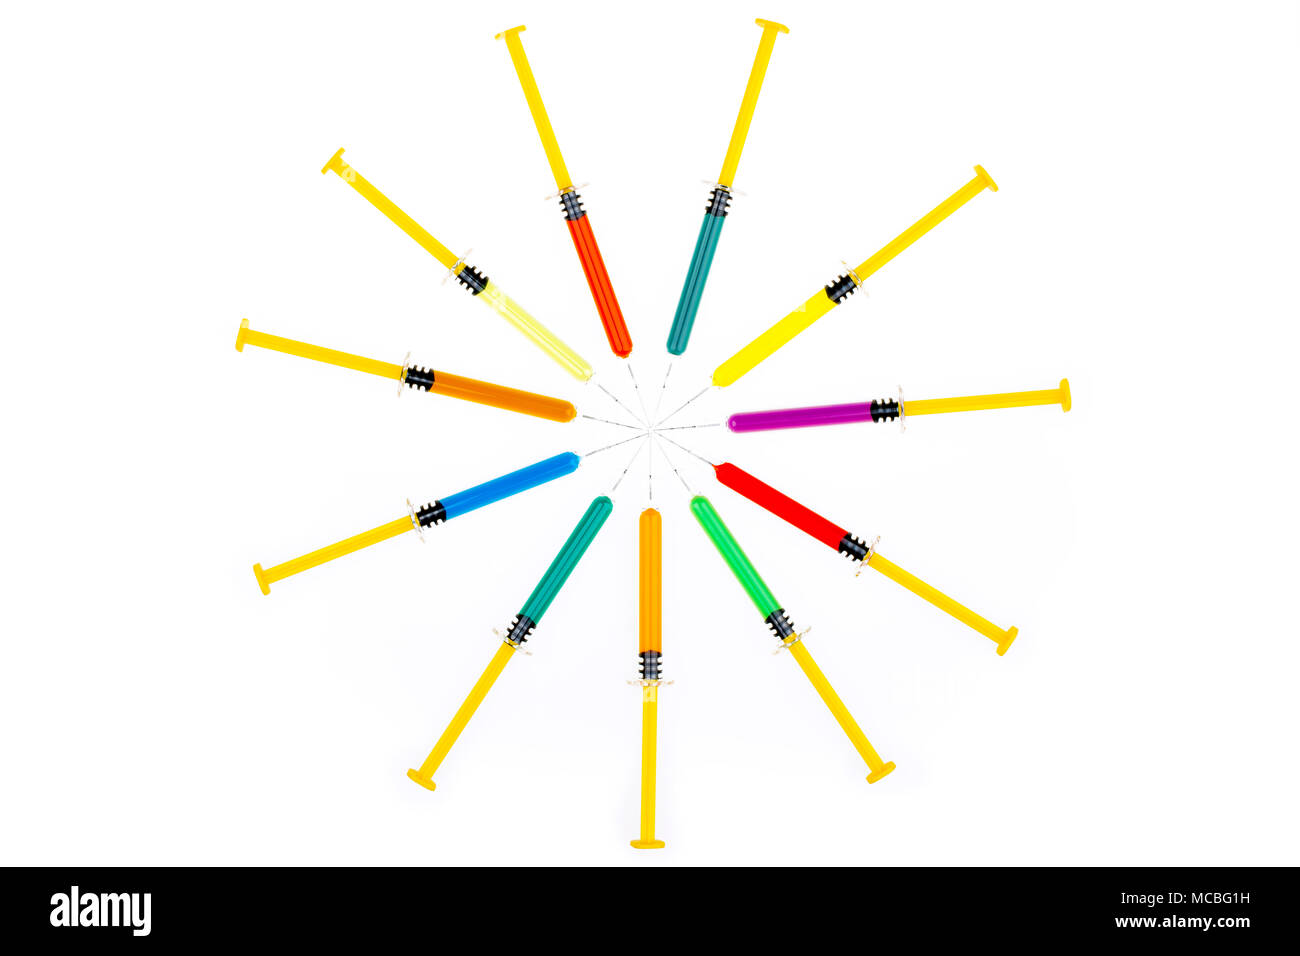 Multiple syringes with needles, filled with various colours of medicine/vaccines. Stock Photo